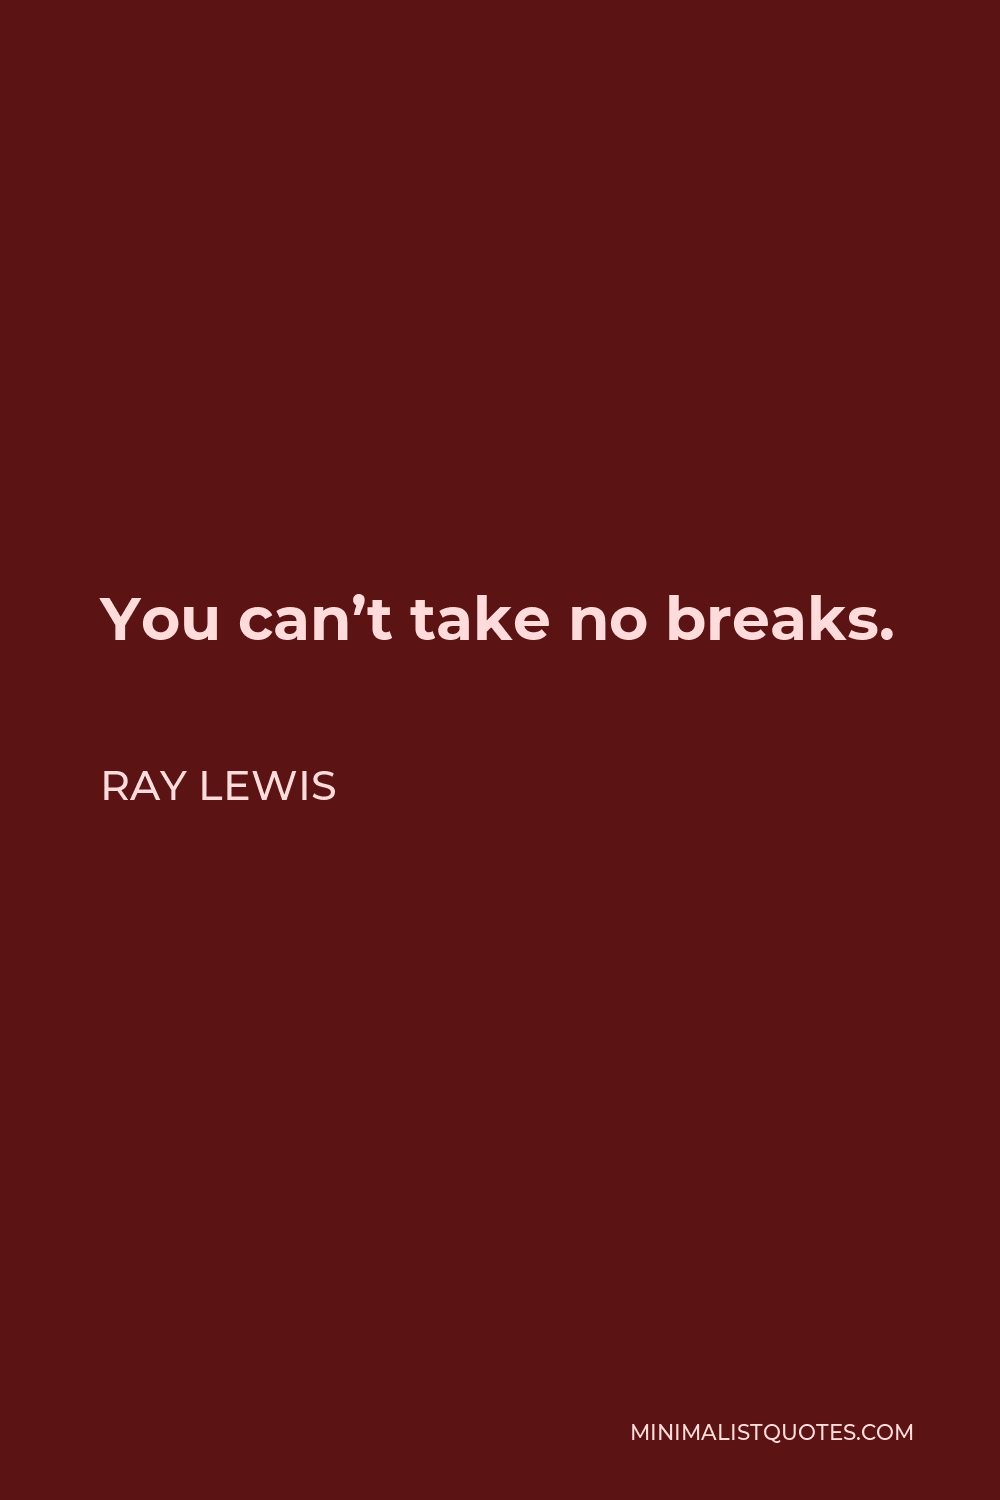 Ray Lewis Quote - You can’t take no breaks.